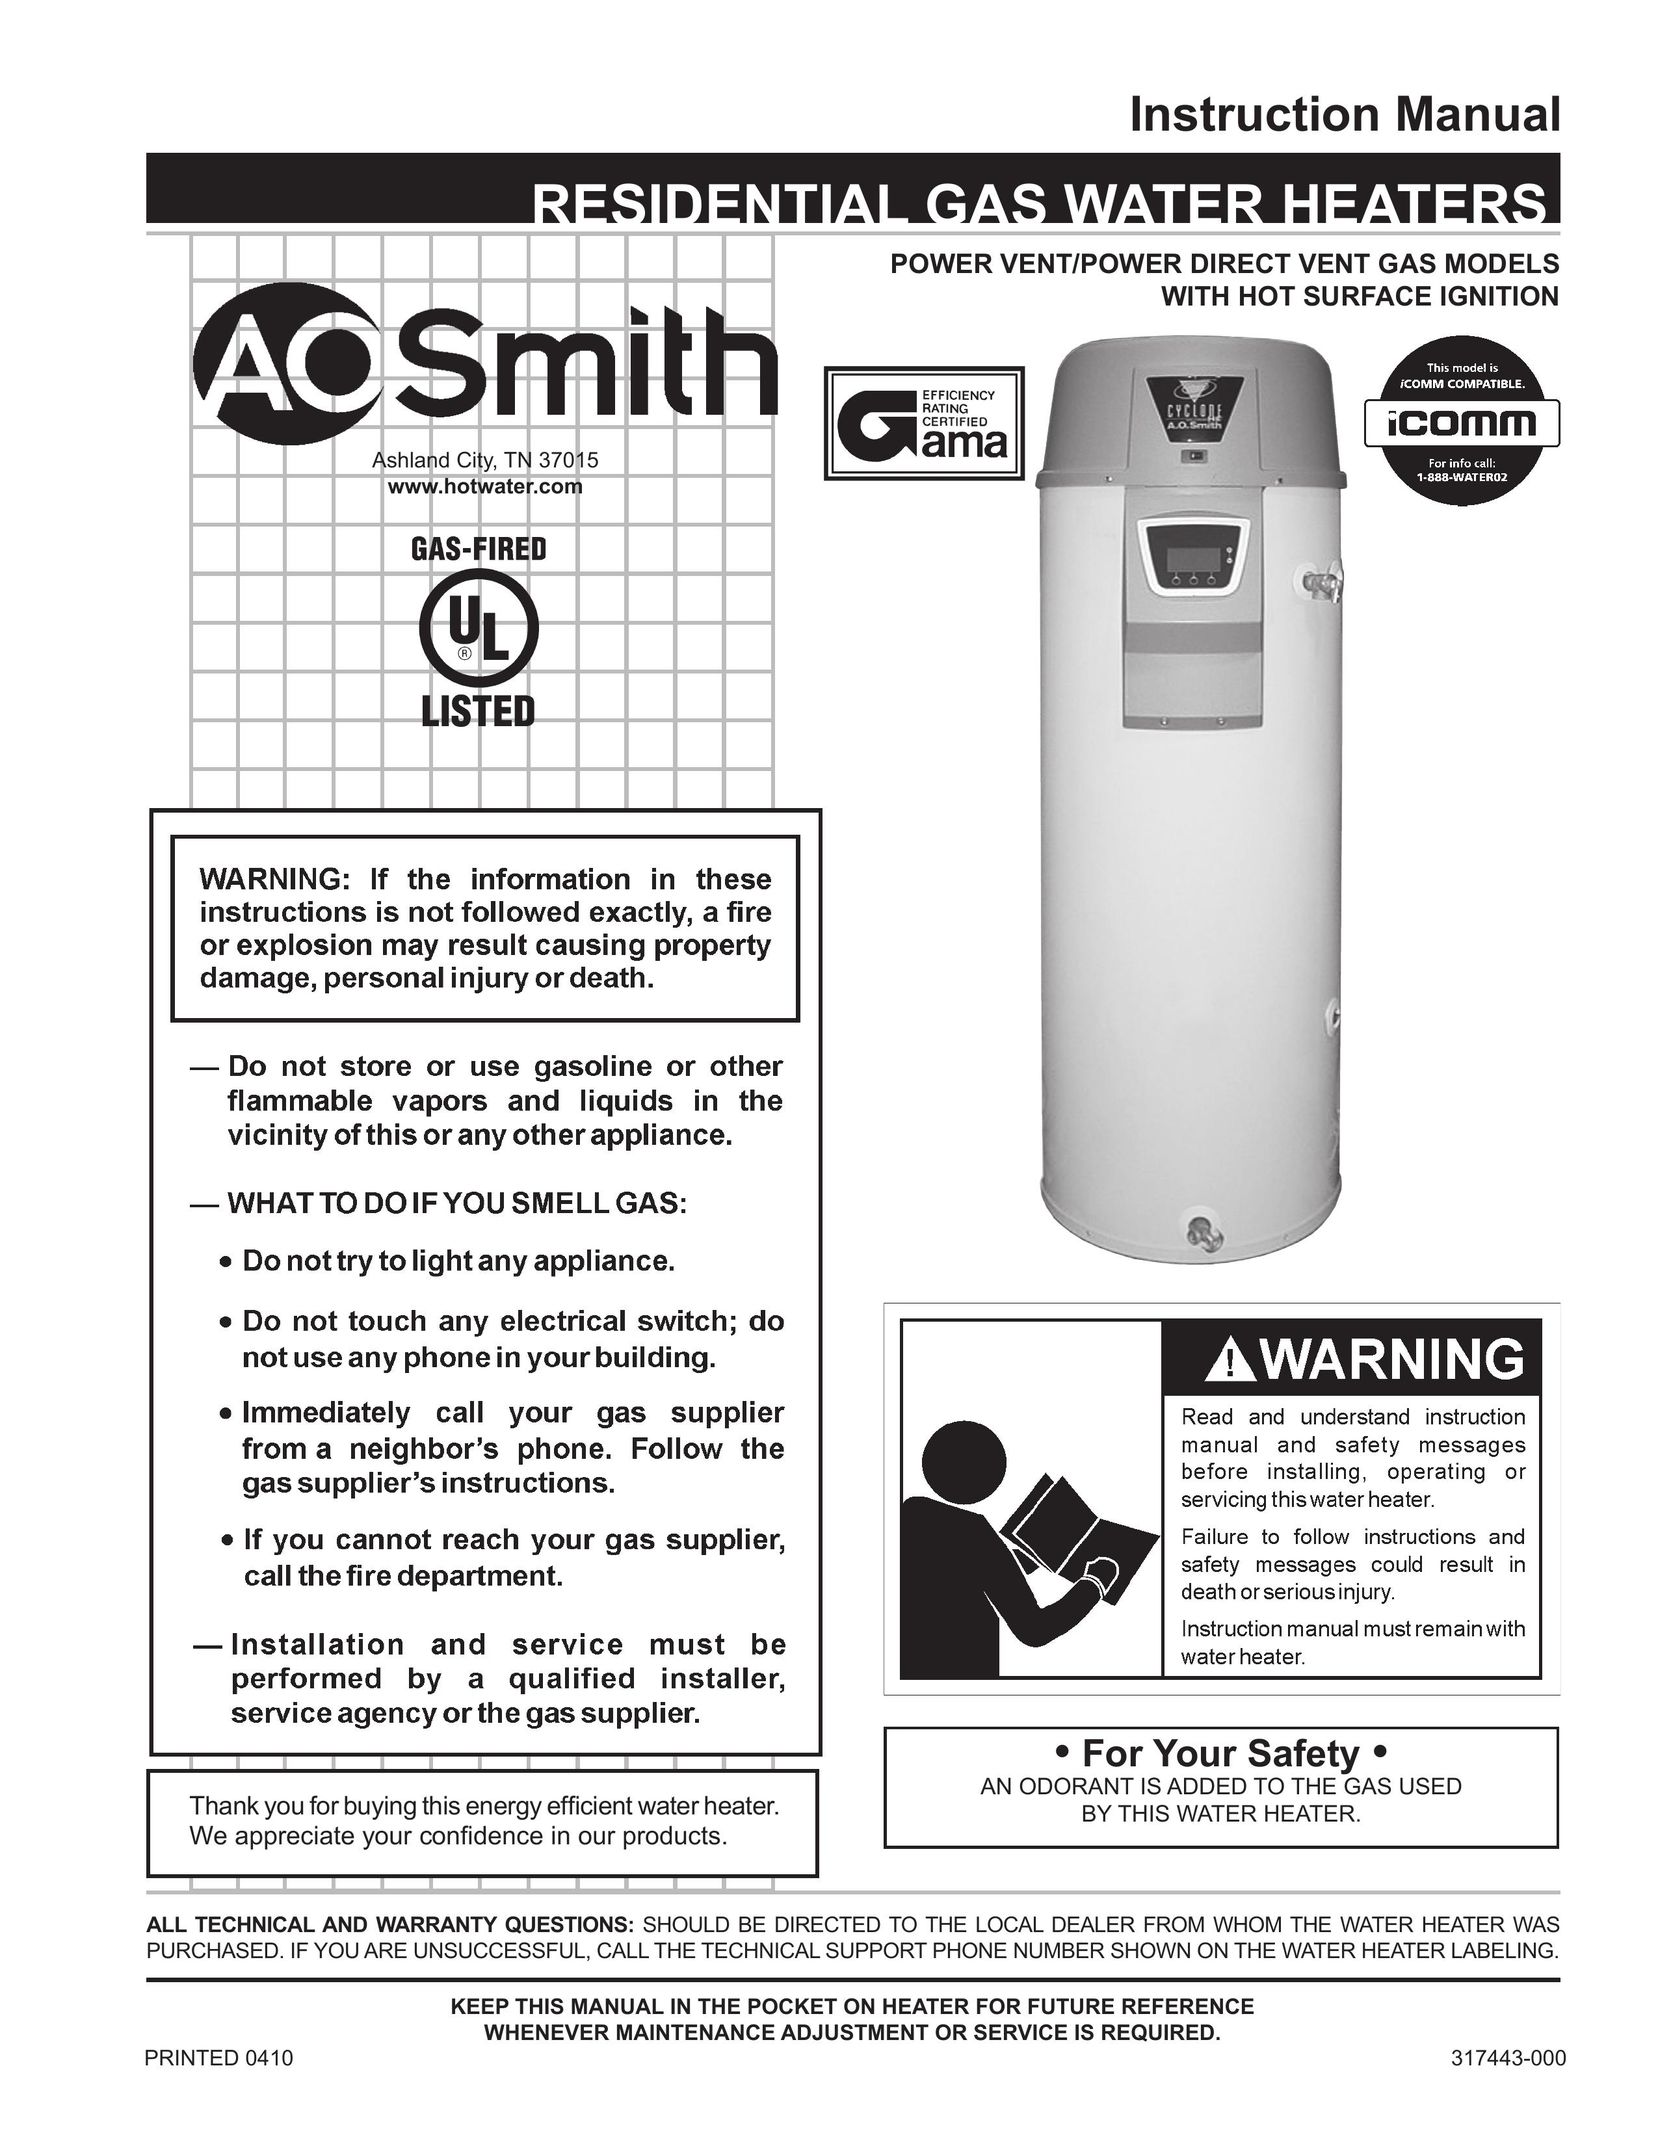 A.O. Smith 100 Power Vent DV Series 120 Water Heater User Manual